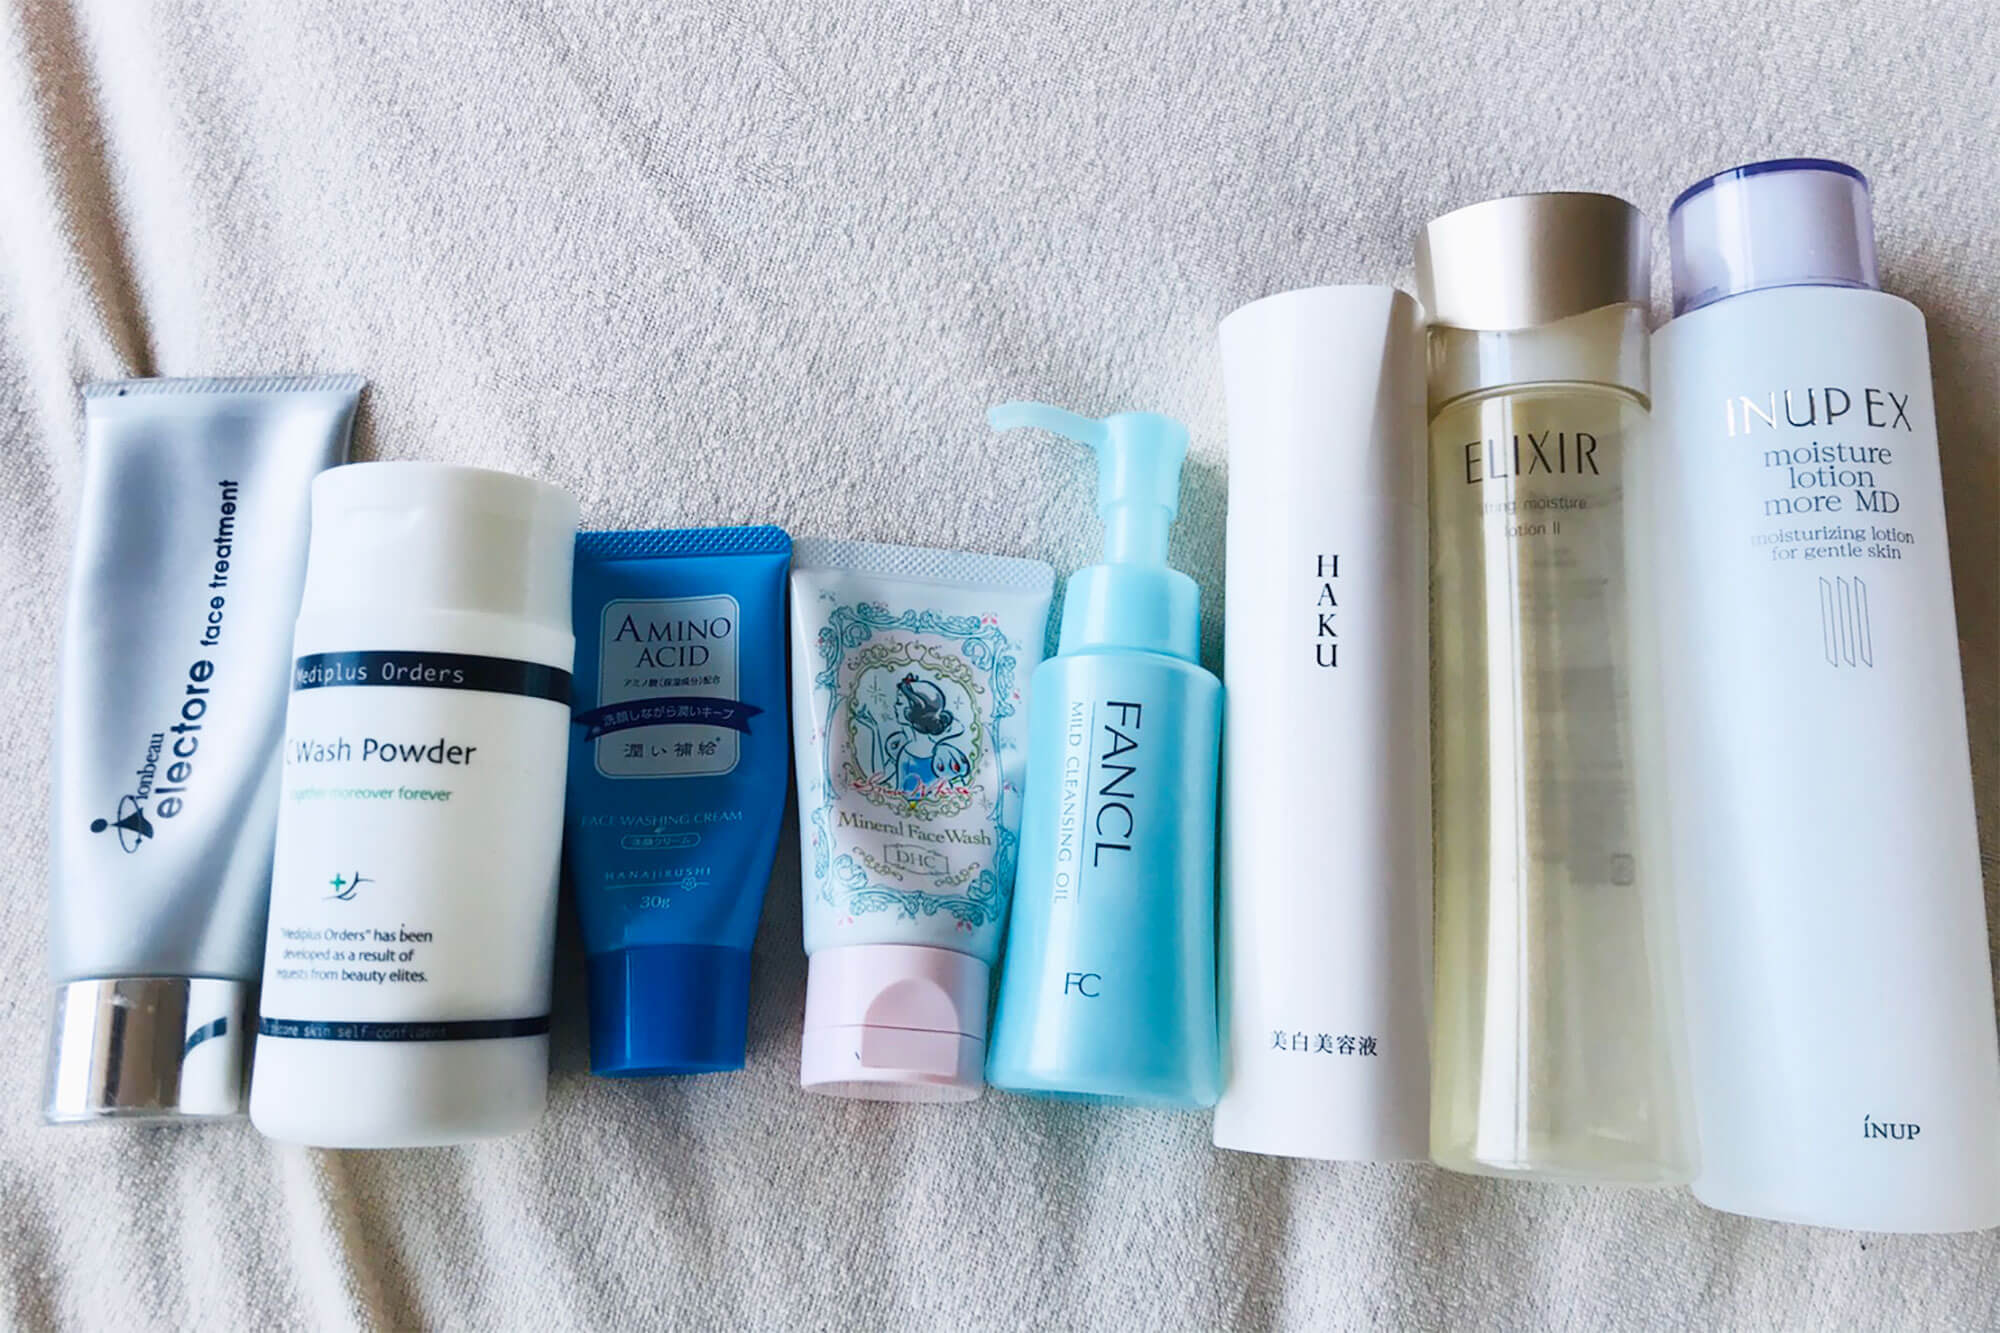 Japanese beauty products